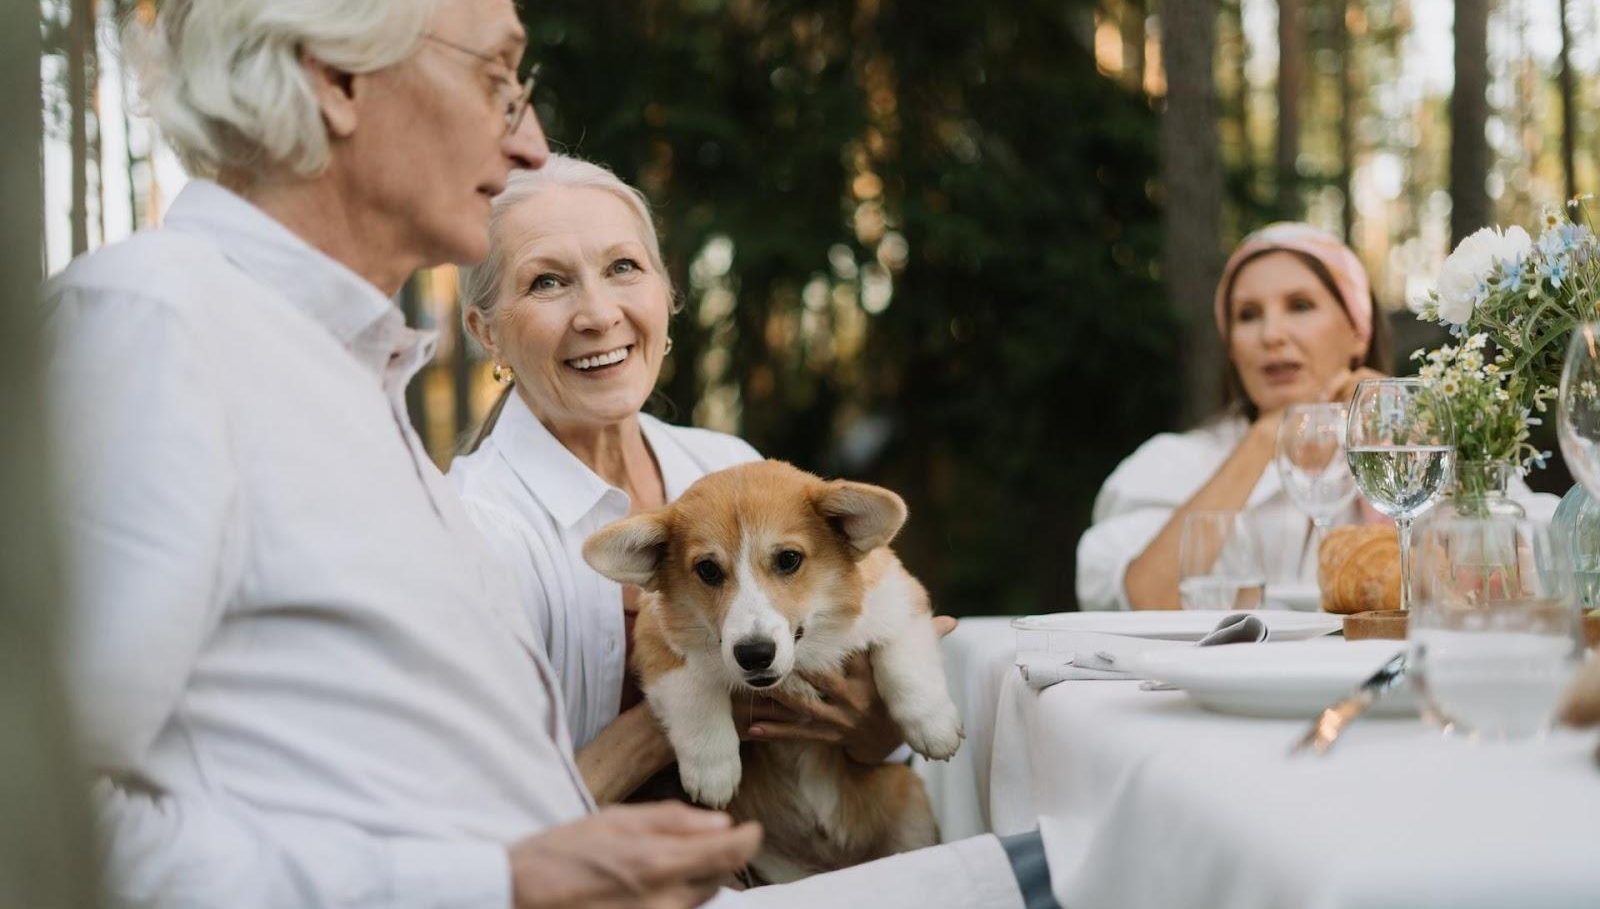 three elderly pepople wearing white and haiving a conversation over dinner